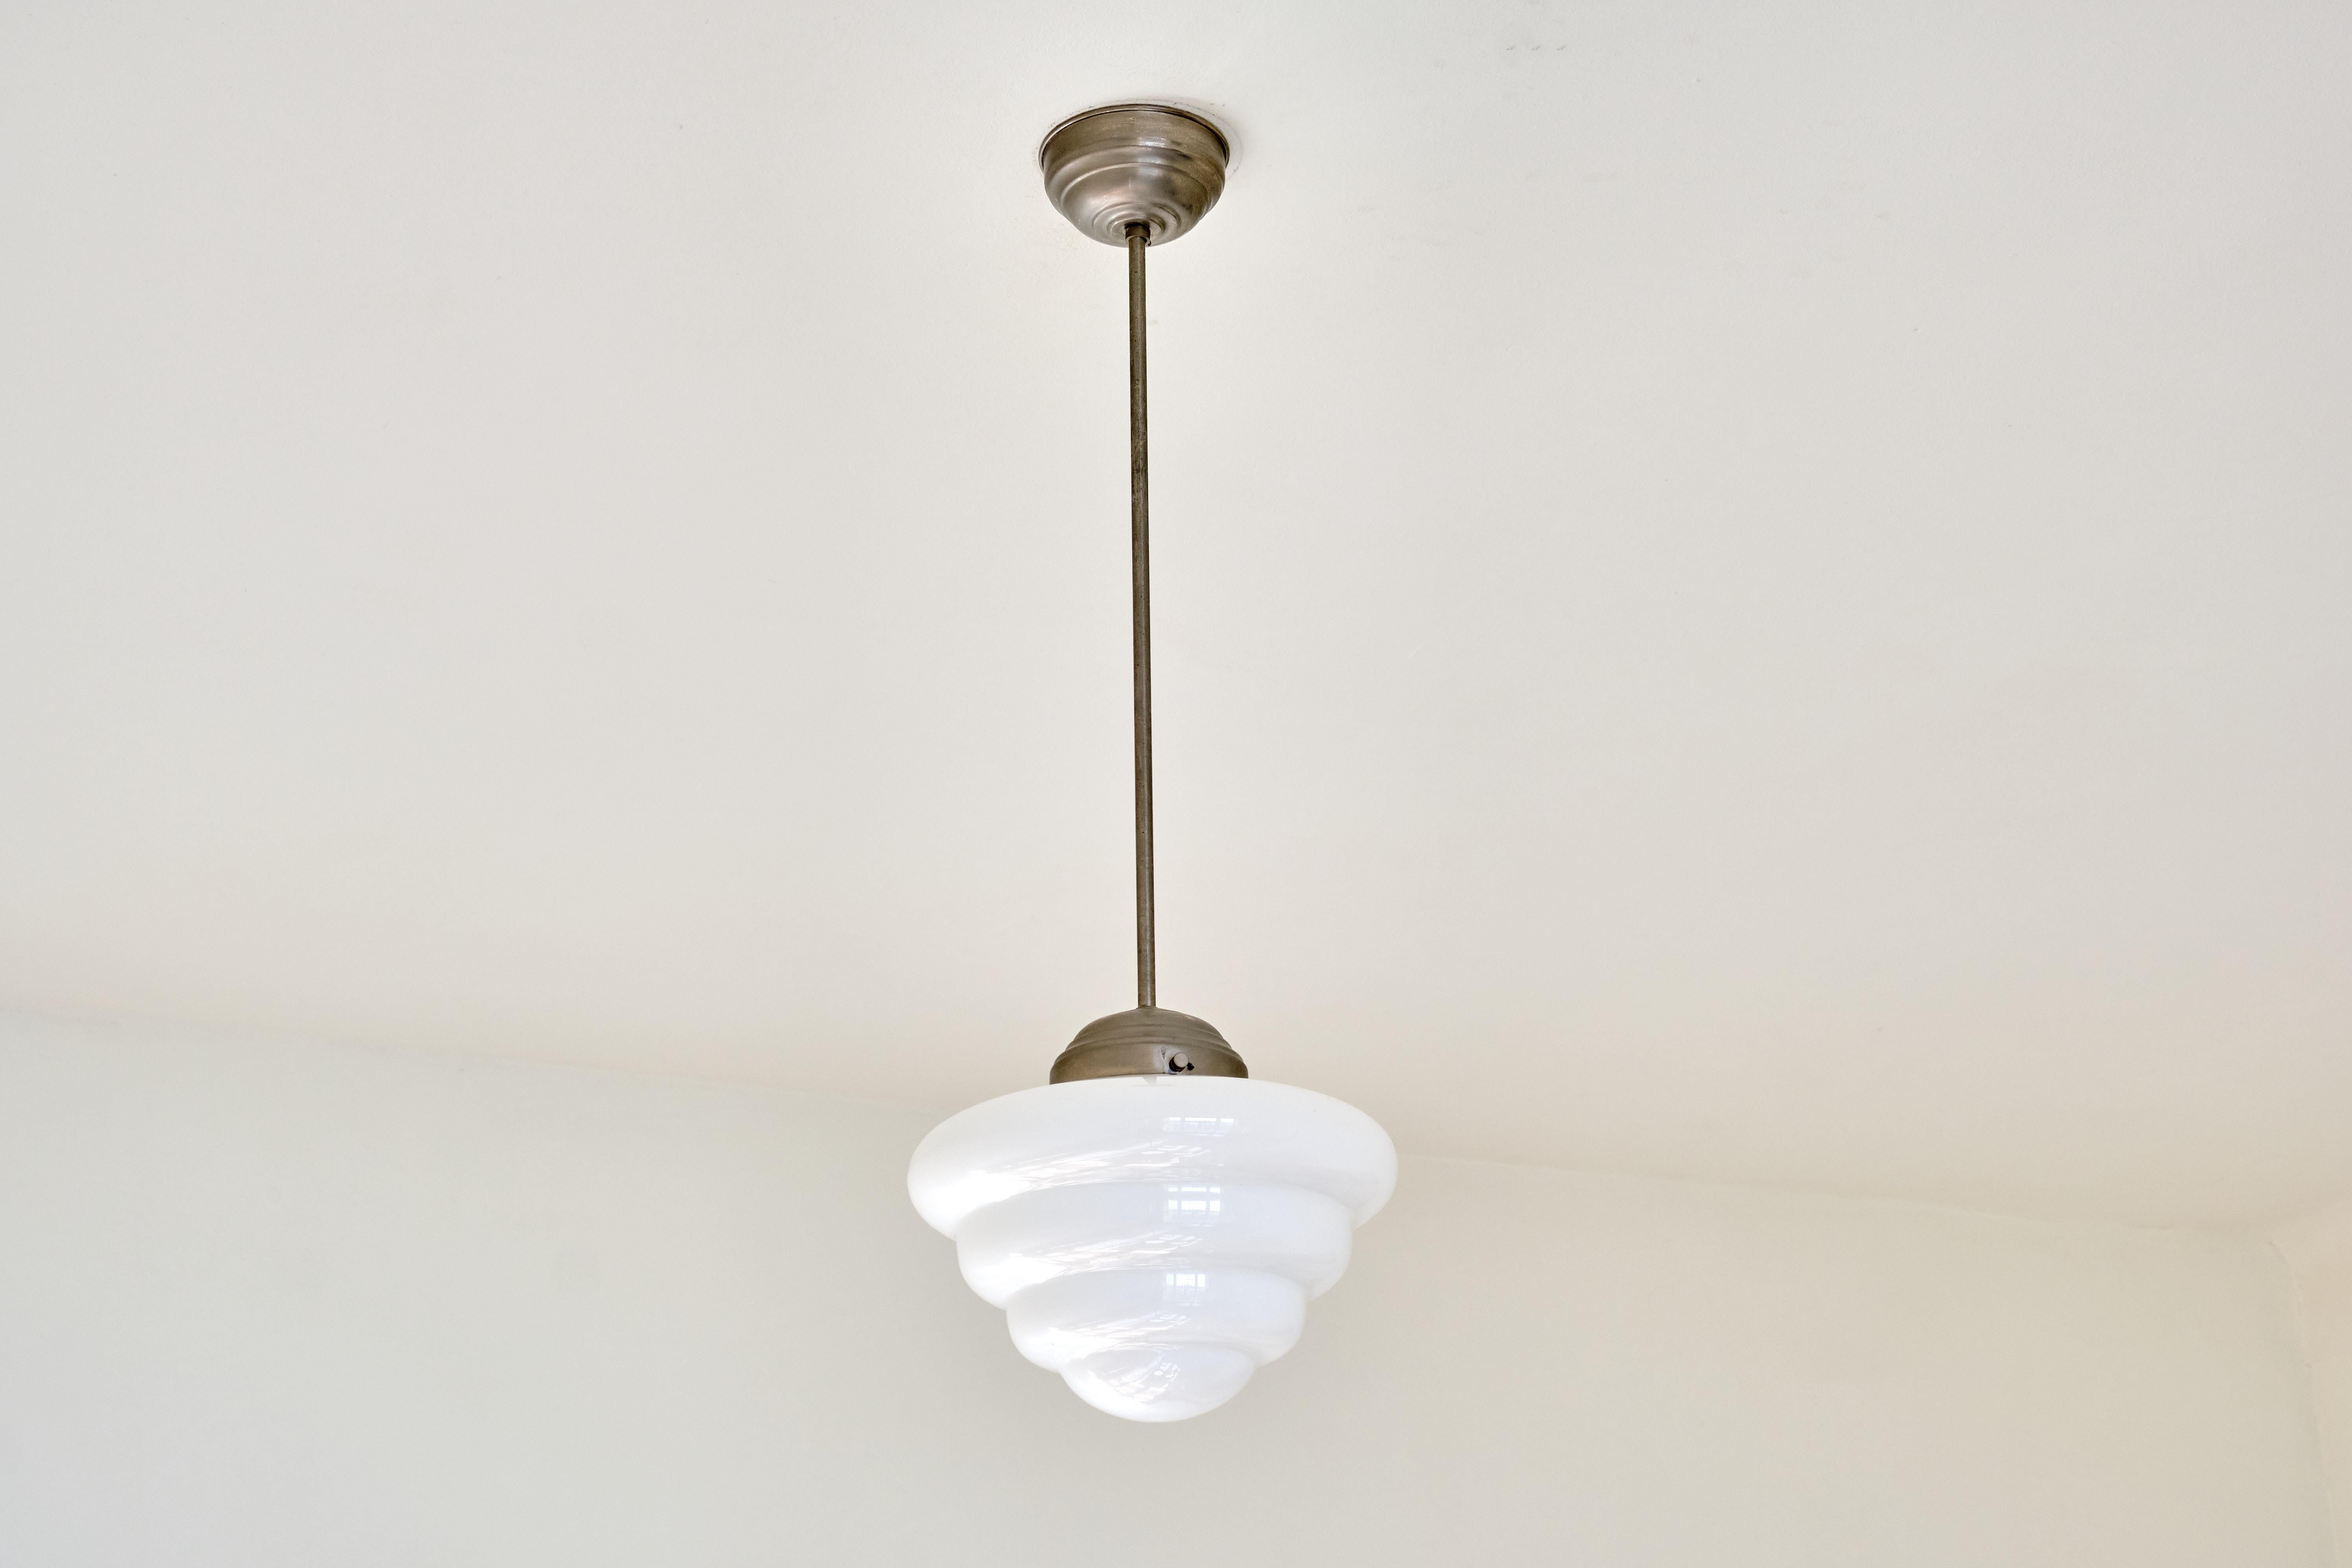 Gispen 'Michelin' Tiered Pendant Light with Opal Glass Shade, Netherlands, 1930s 2